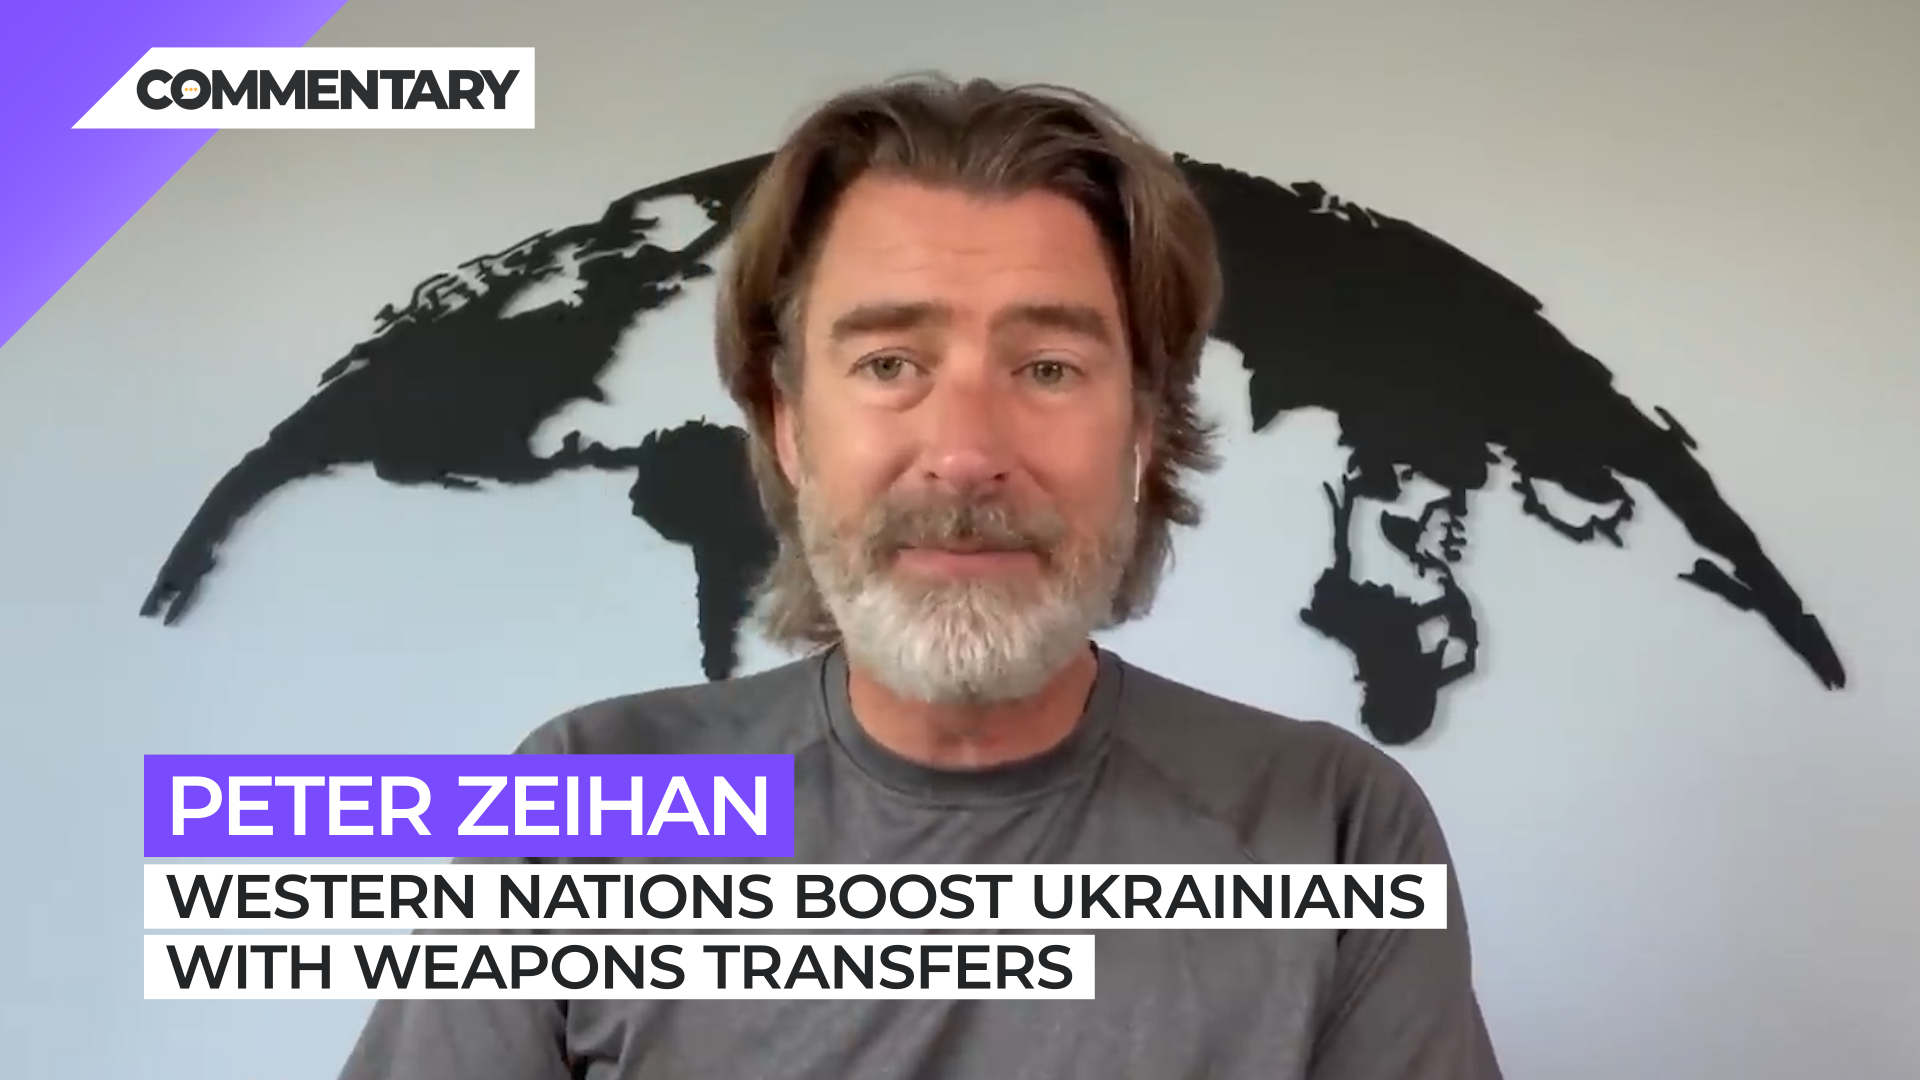 NATO is providing weapons support to the Ukrainians at a crucial time in their fight to hold off the Russians.